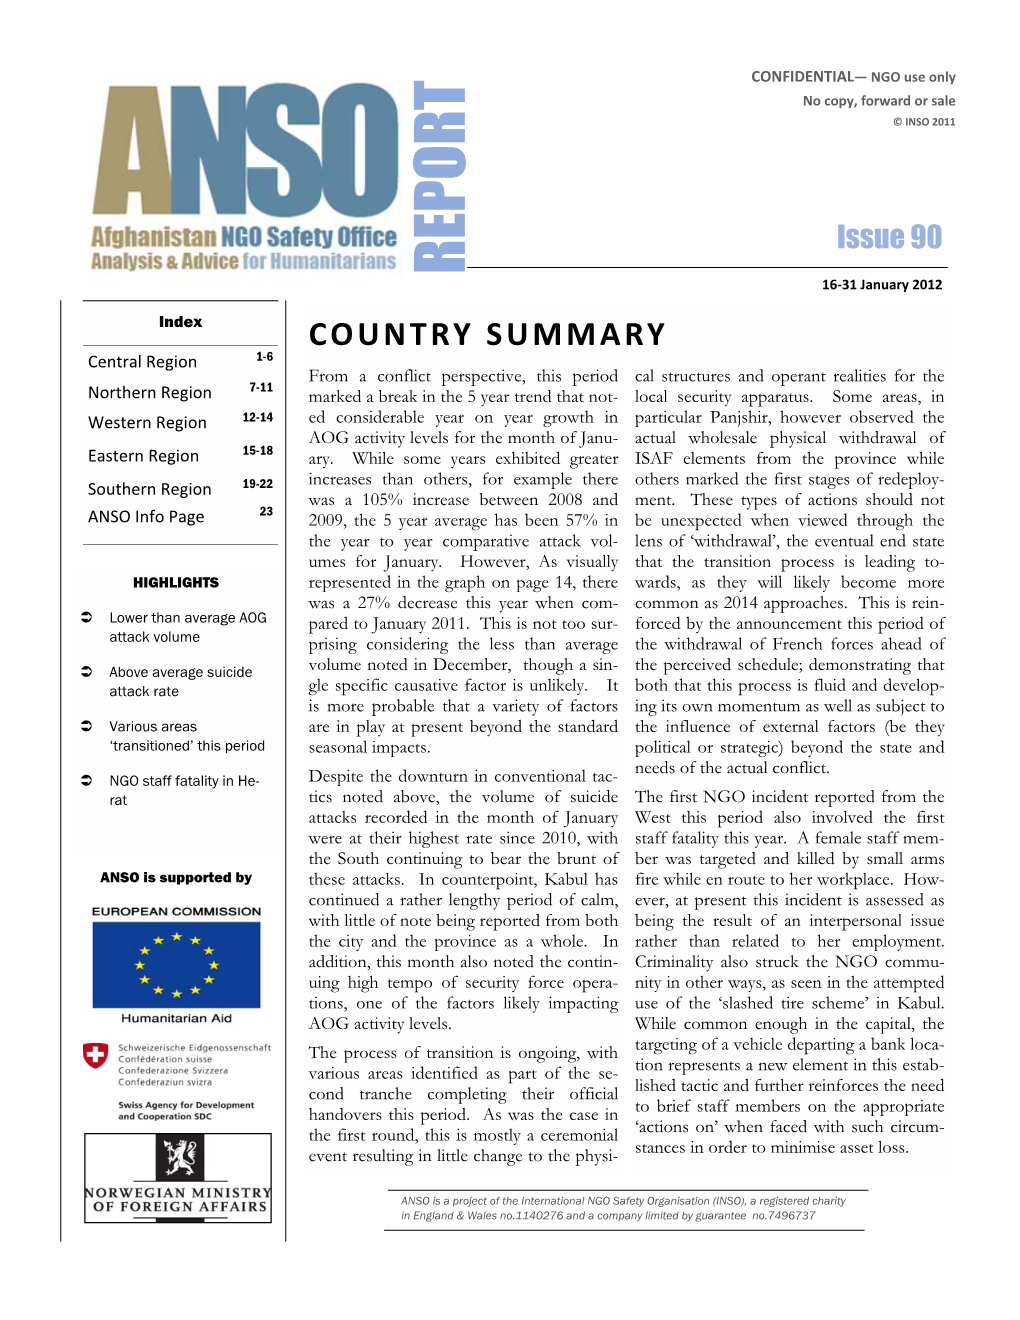 The ANSO Report (16-31 Jan 2012)